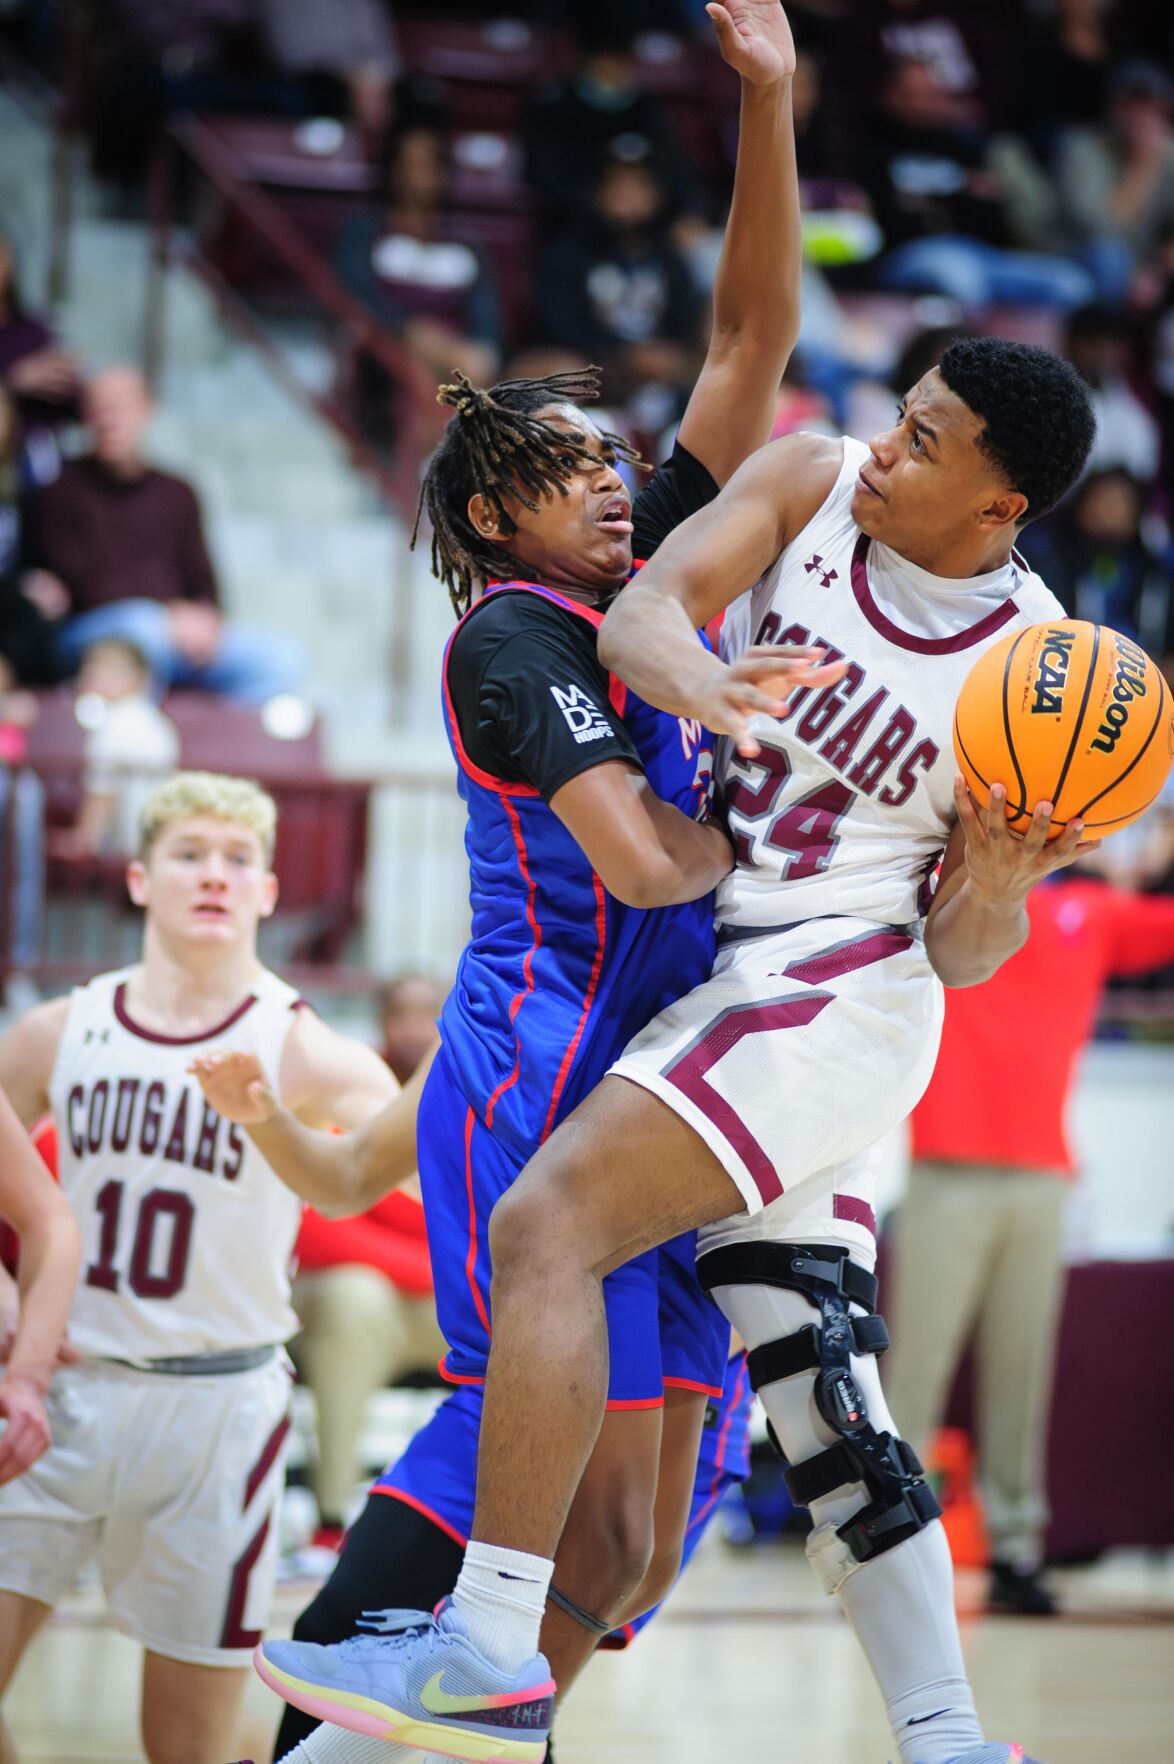 Ada High School Basketball Team Victorious over Tuttle with Impressive Performances